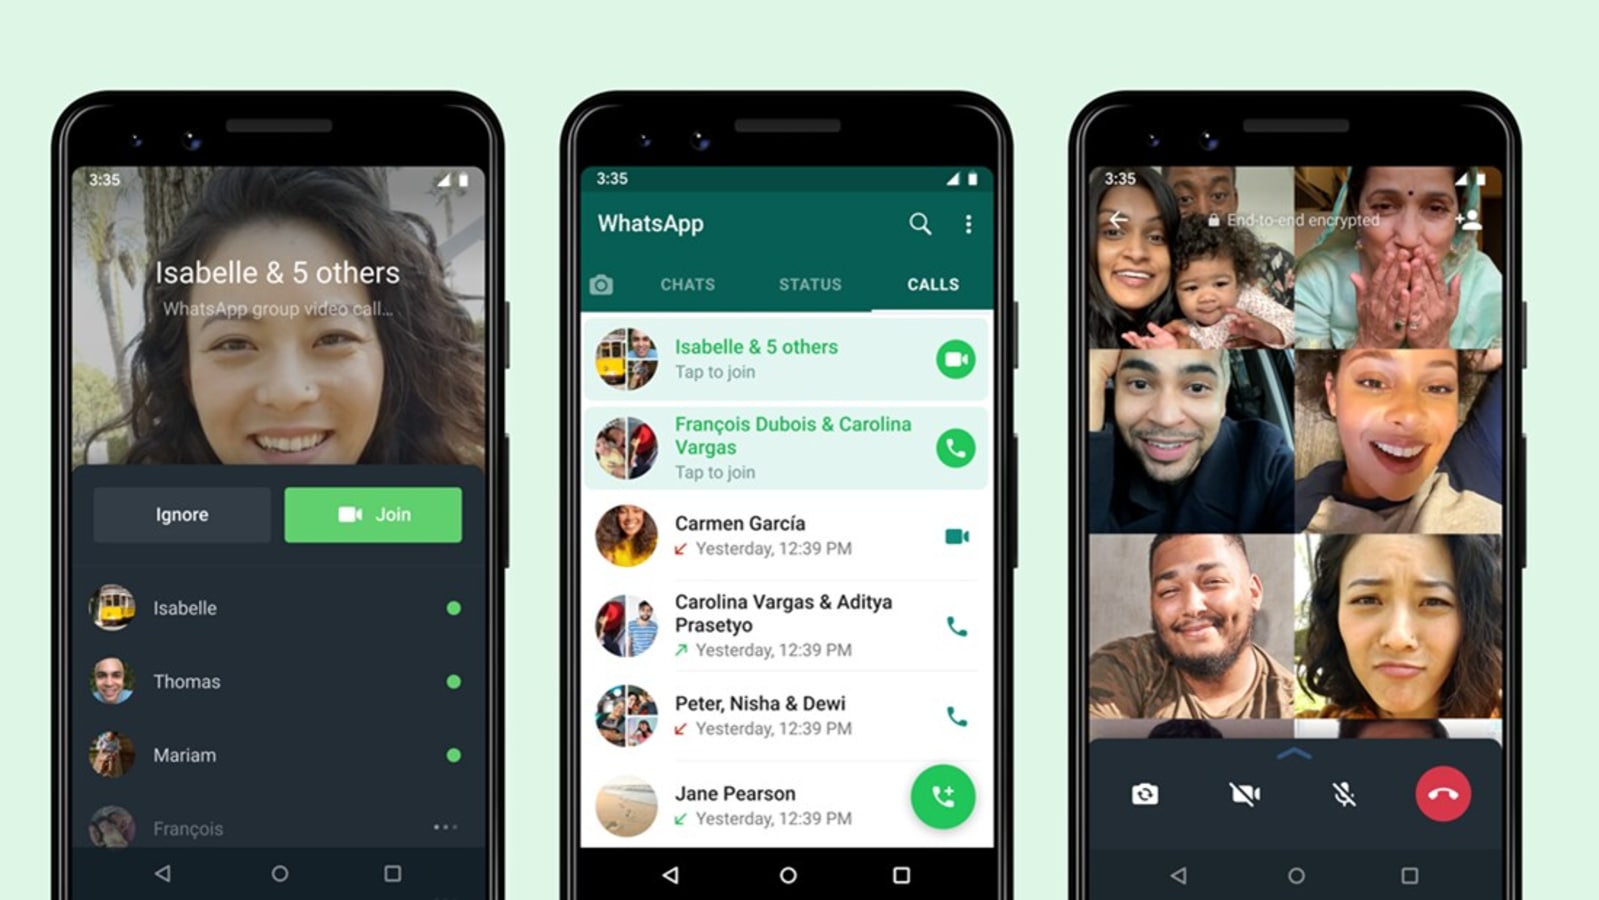 WhatsApp launches a new Discord-like voice chat feature for large groups |  TechCrunch